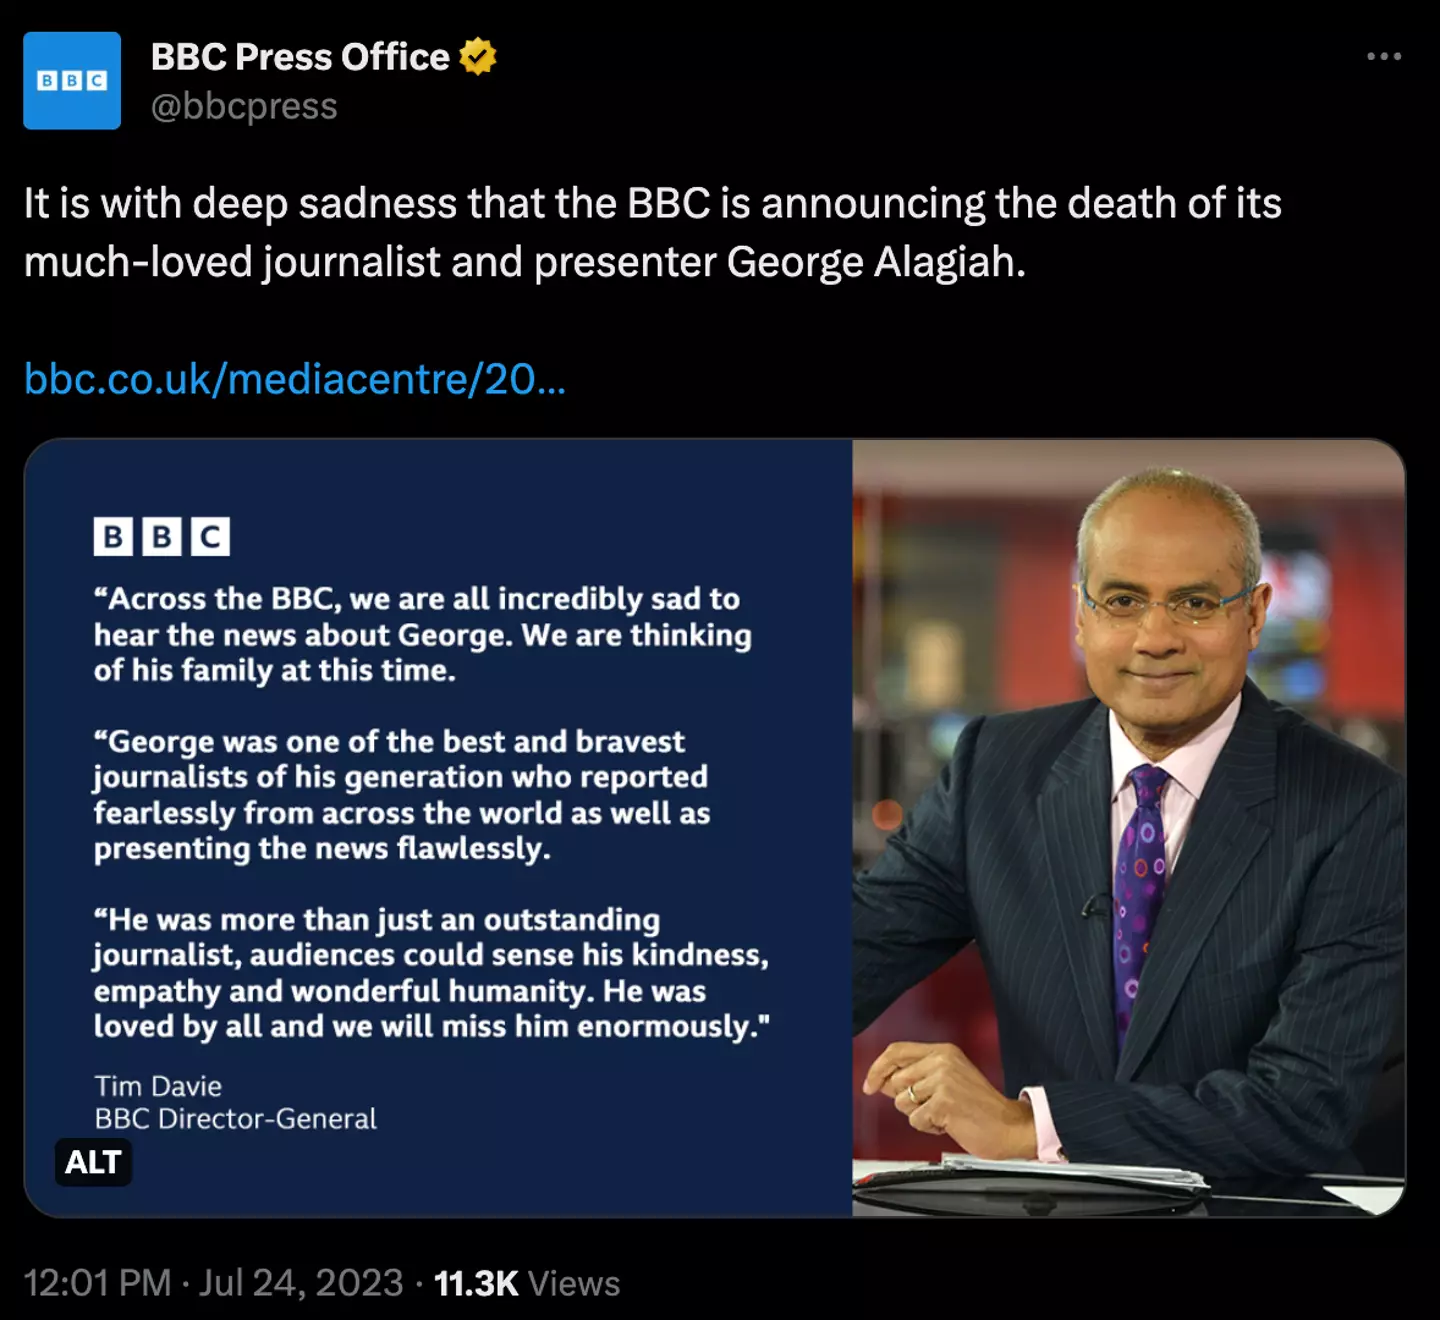 The BBC posted a tribute to the much-loved journalist and presenter.